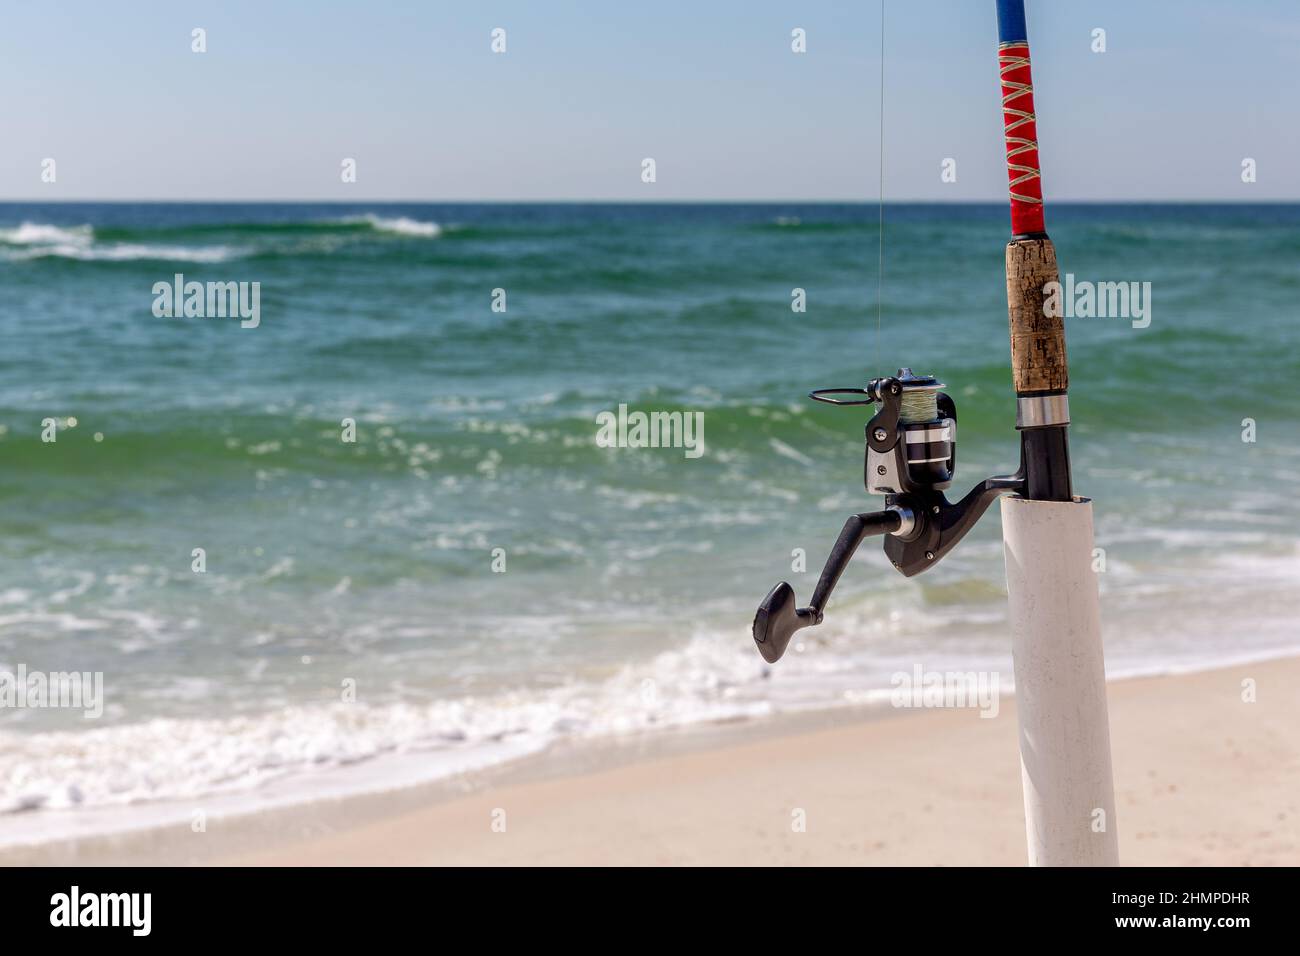 Surf fishing pole in a holder at the shore. Close up view with copy space  if needed. Concepts could include fishing, travel, relaxation, leisure  Stock Photo - Alamy